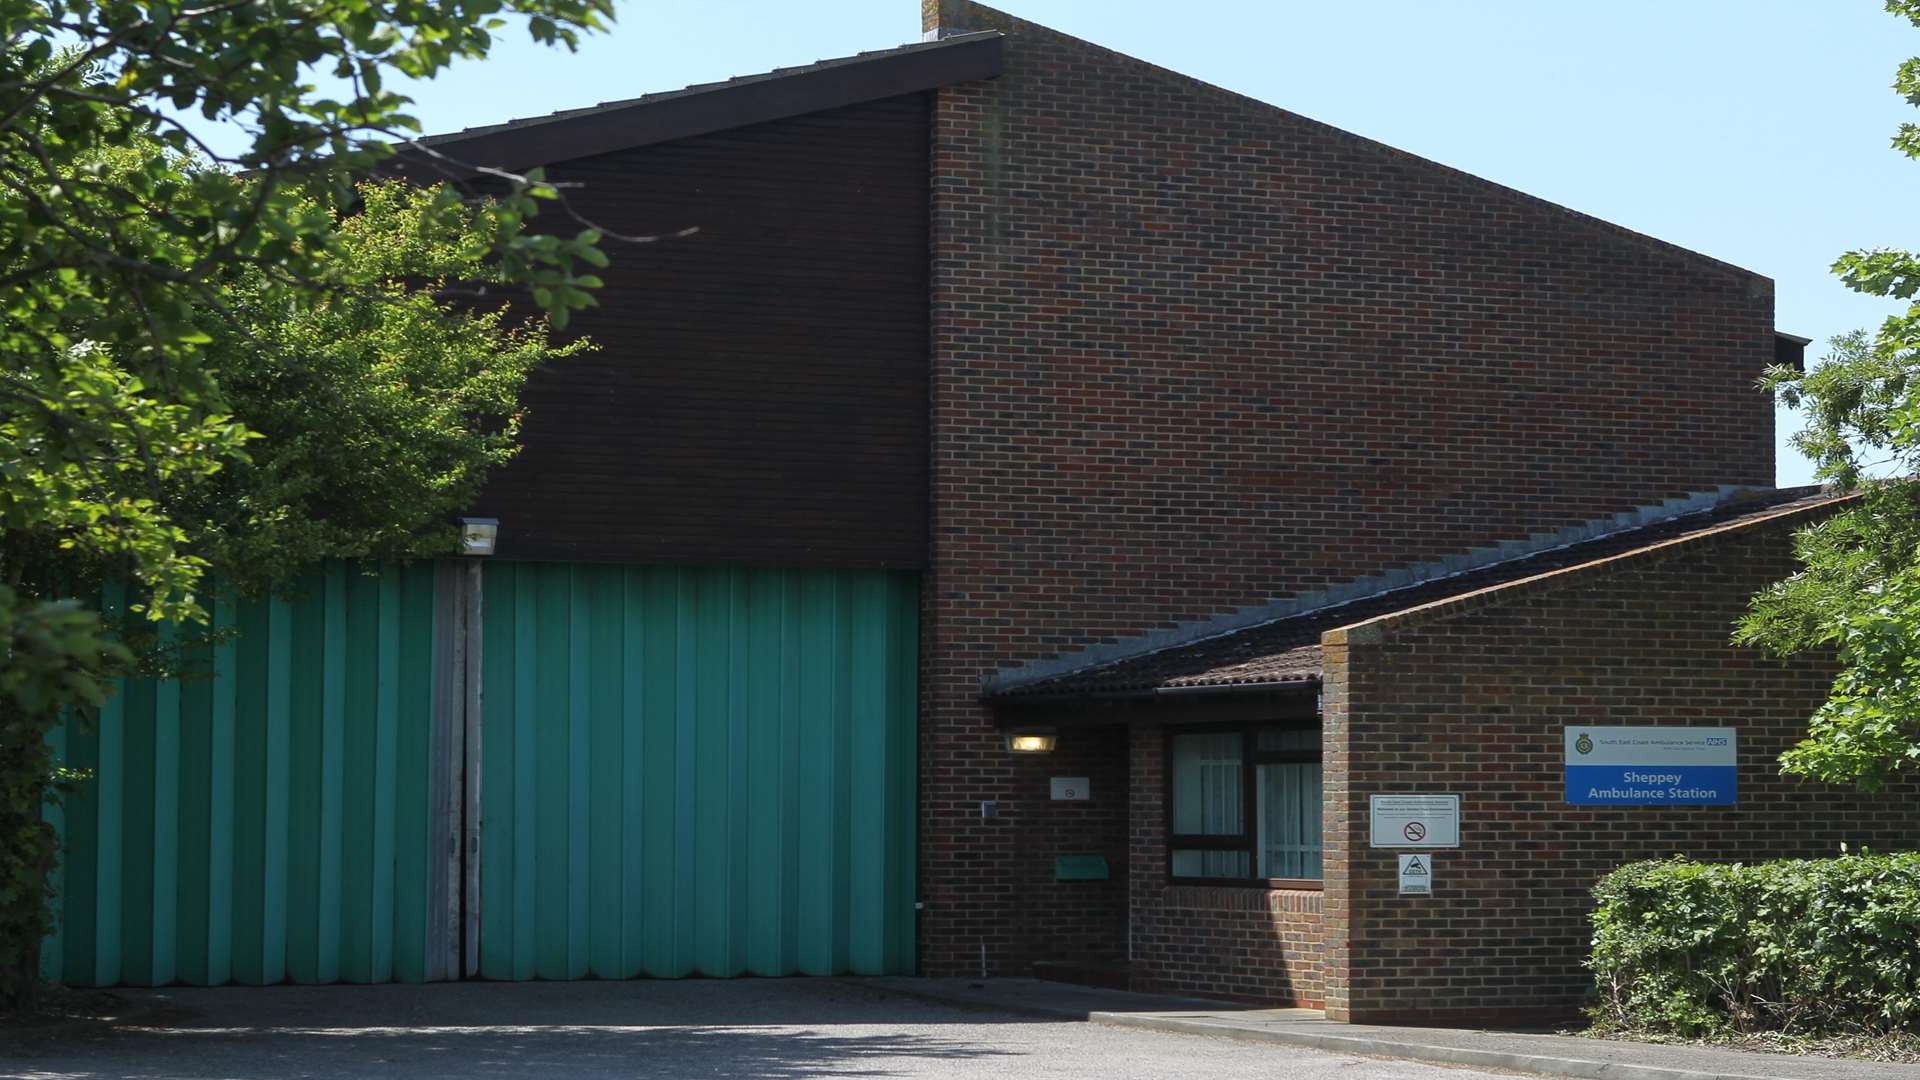 Sheppey Ambulance Station has been targeted by thieves once again.